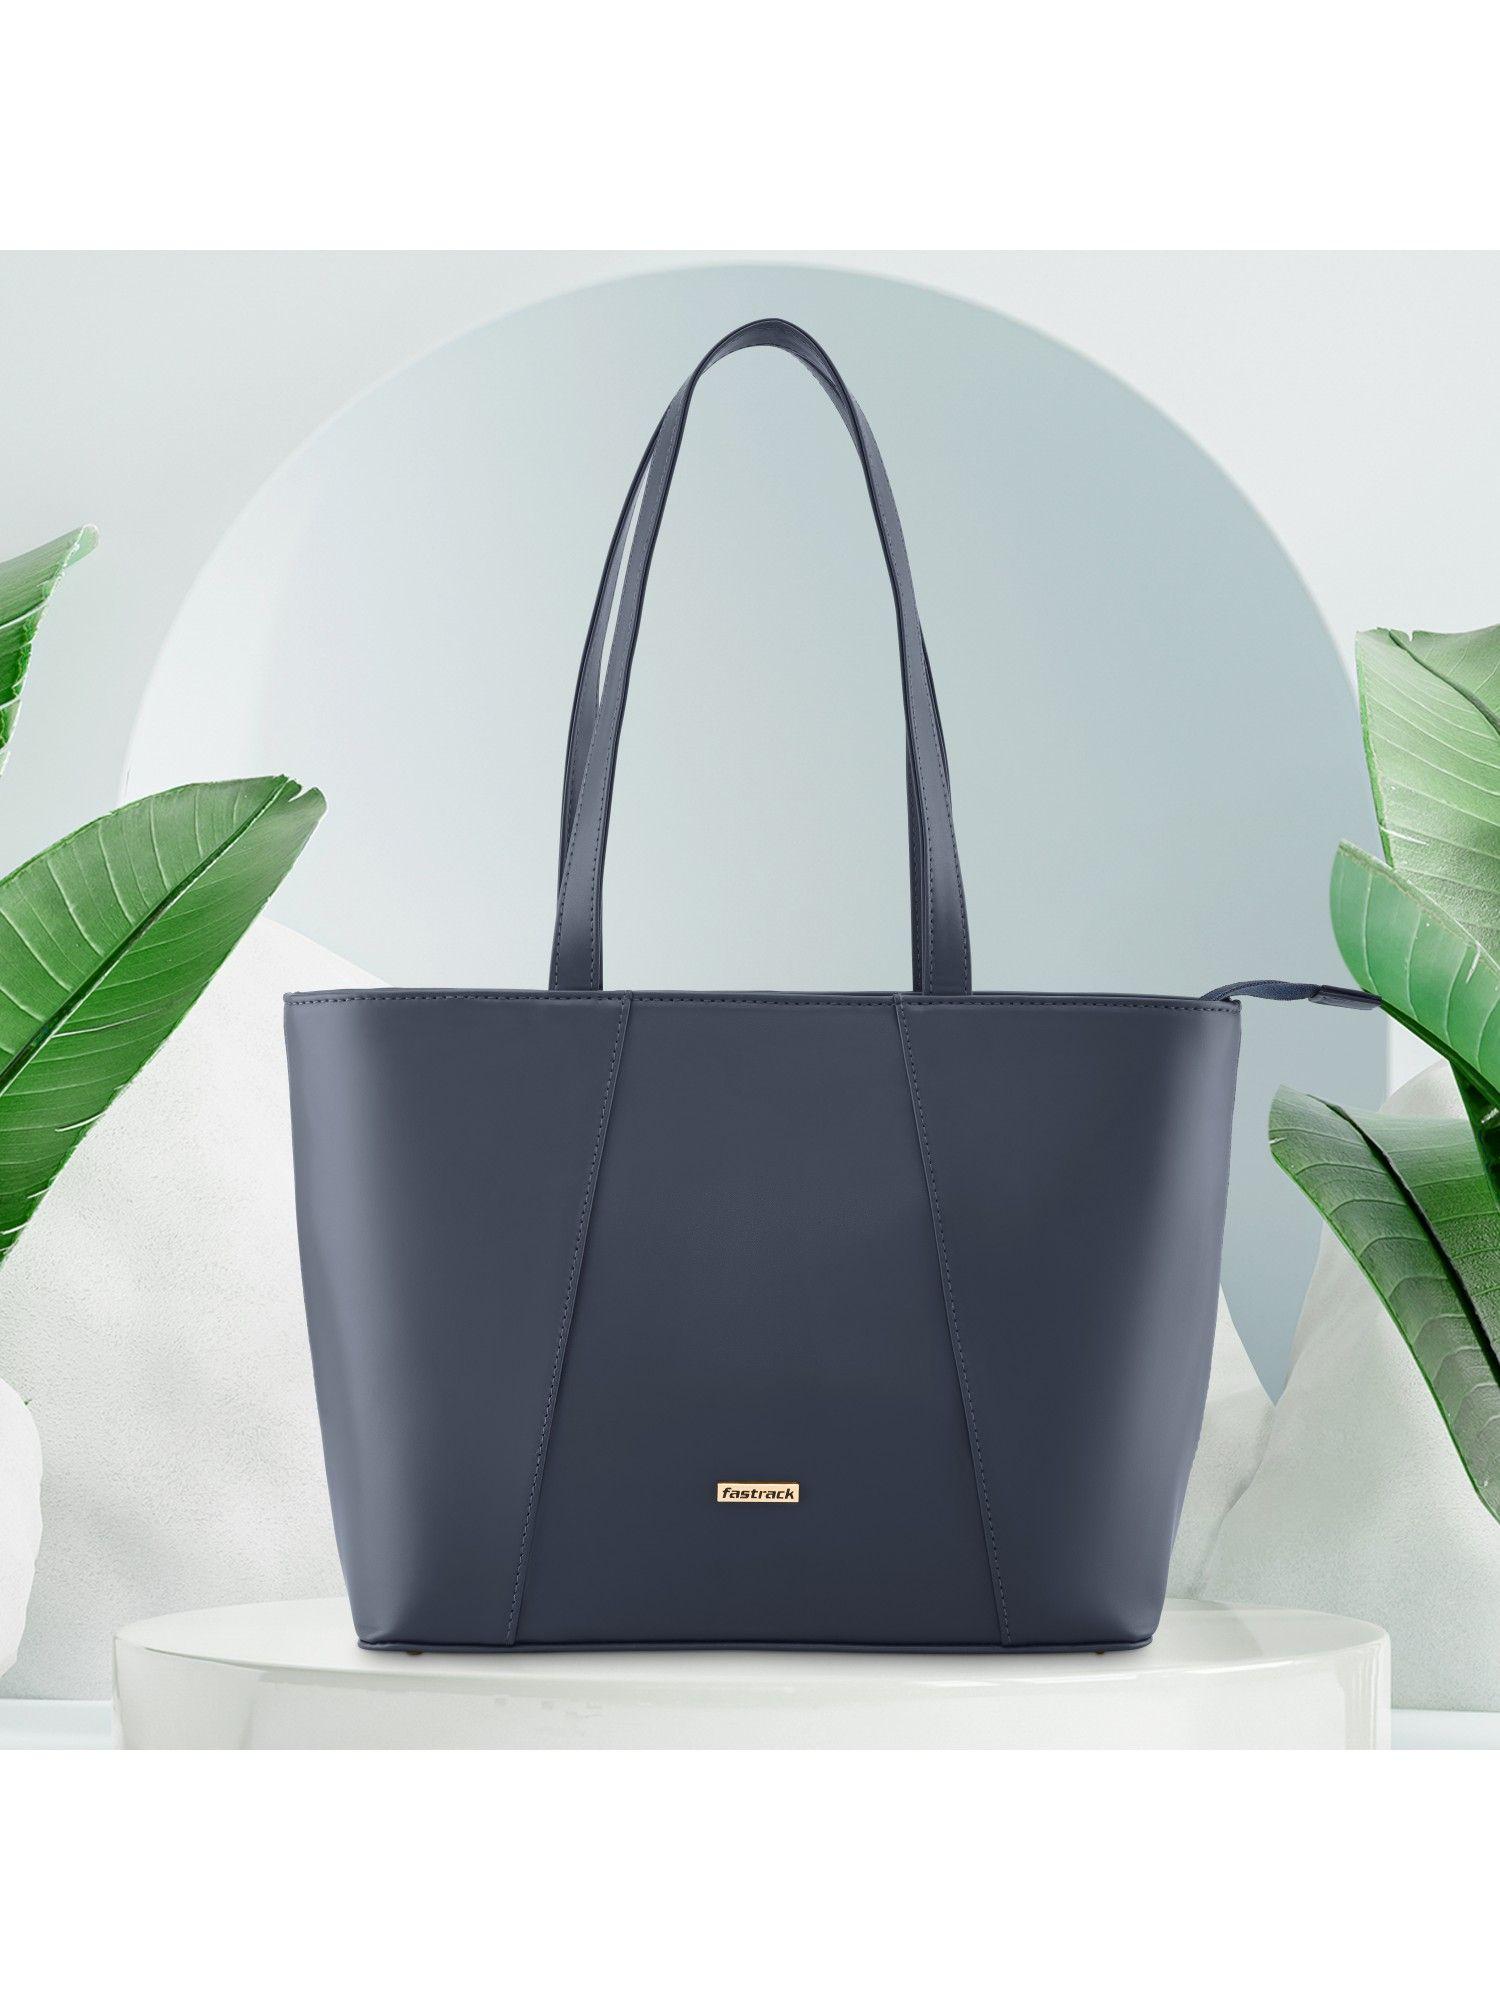 navy blue tote bag for women